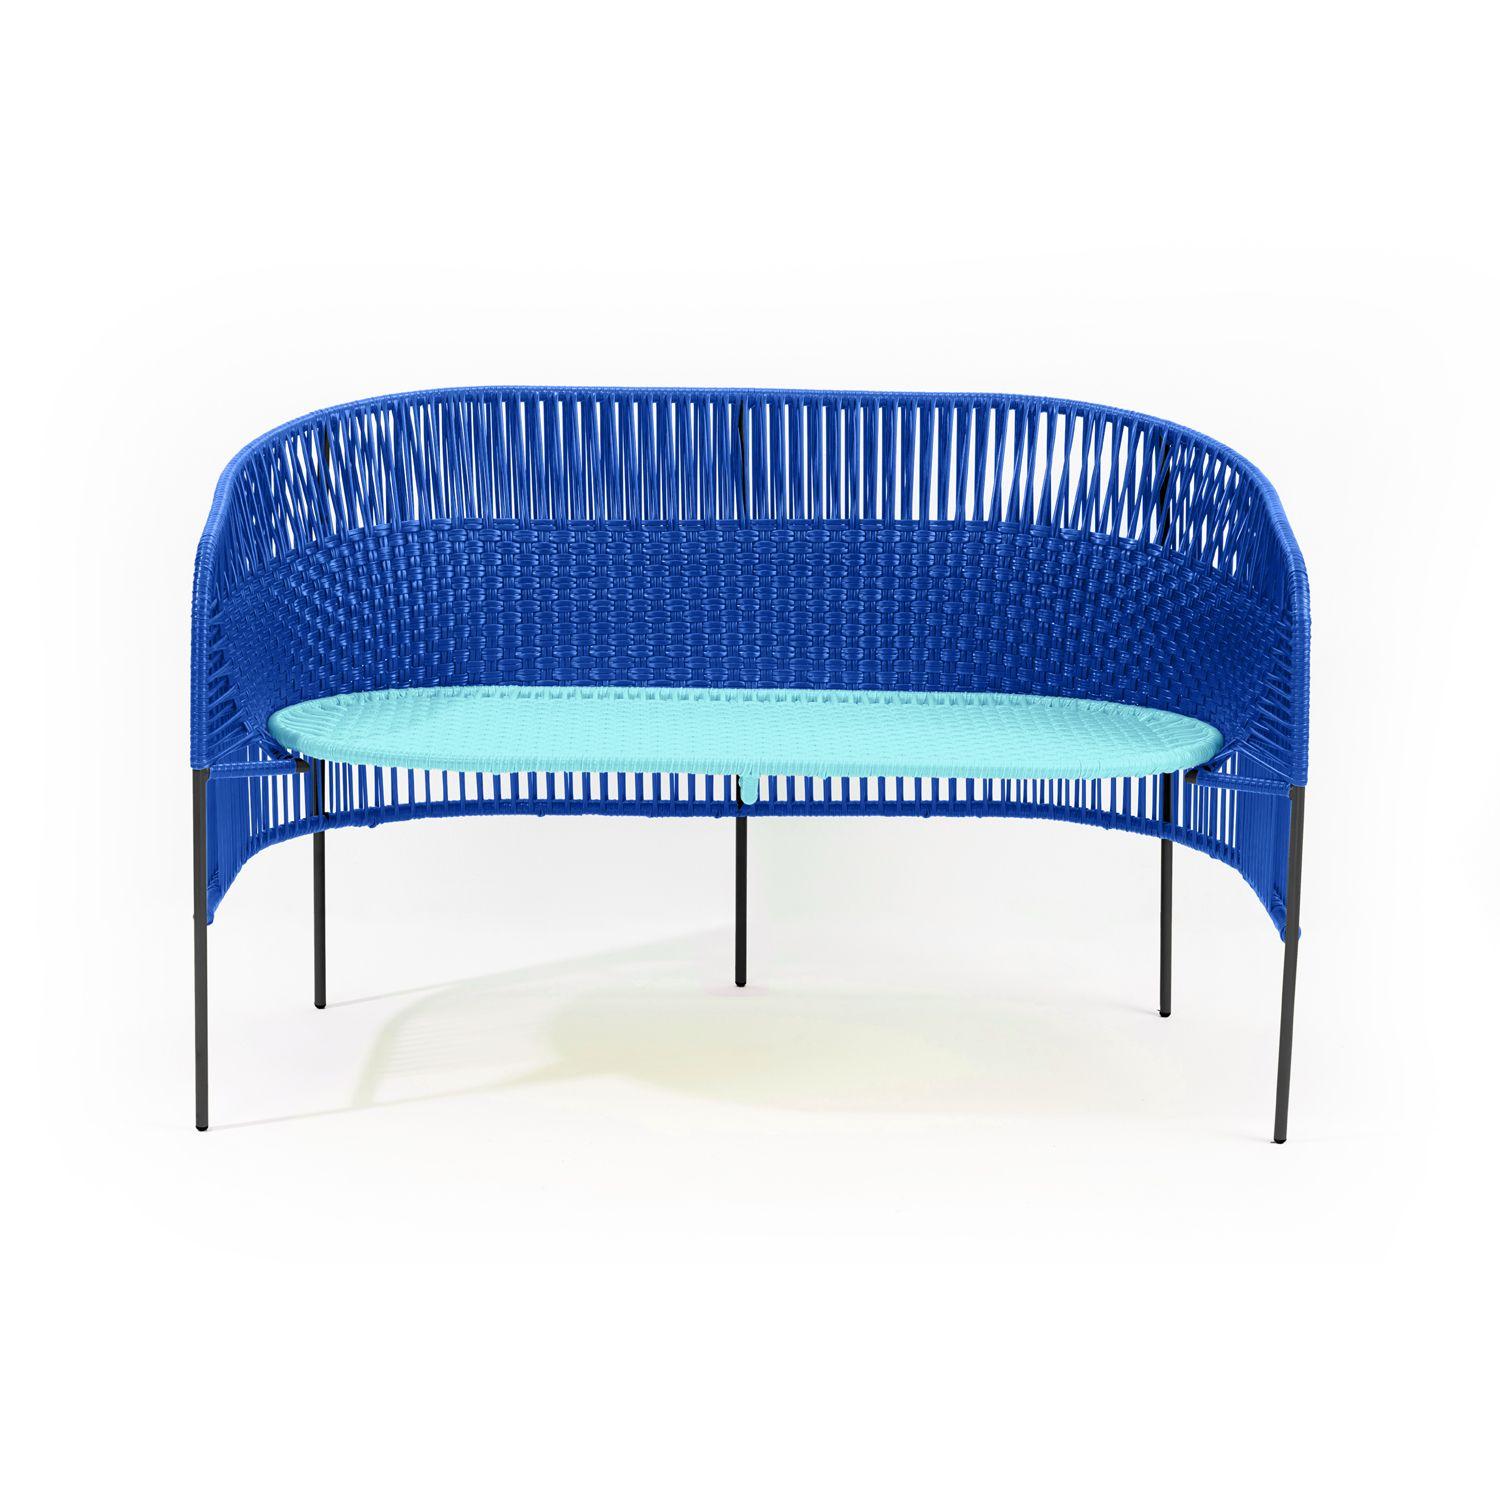 Blue Caribe 2 seater bank by Sebastian Herkner
Materials: Galvanized and powder-coated tubular steel. PVC strings are made from recycled plastic.
Technique: Made from recycled plastic and weaved by local craftspeople in Colombia. 
Dimensions: W